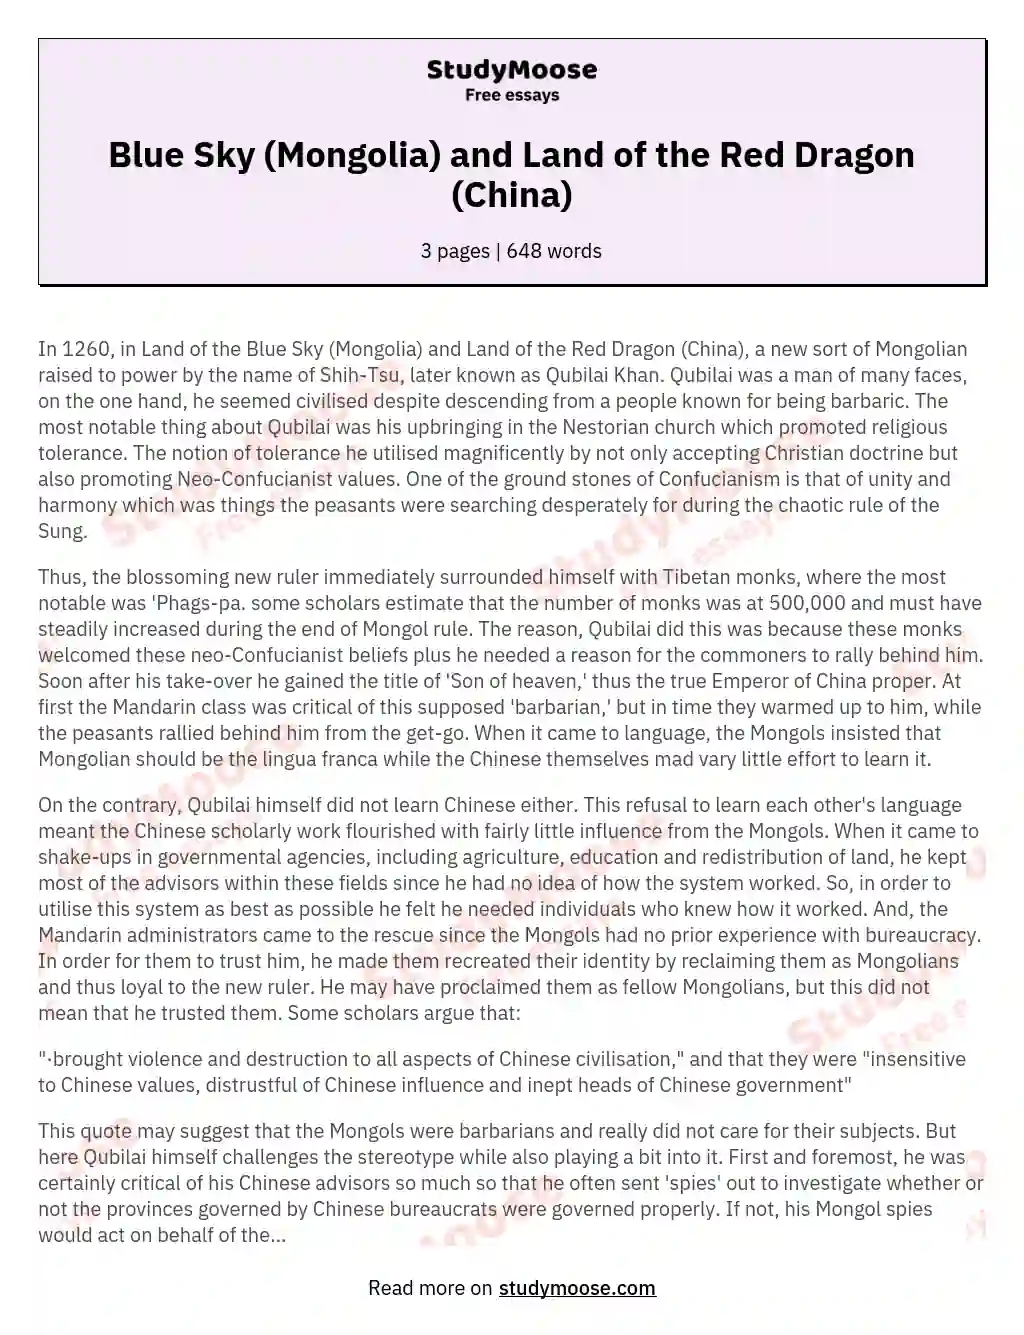 Blue Sky (Mongolia) and Land of the Red Dragon (China) essay